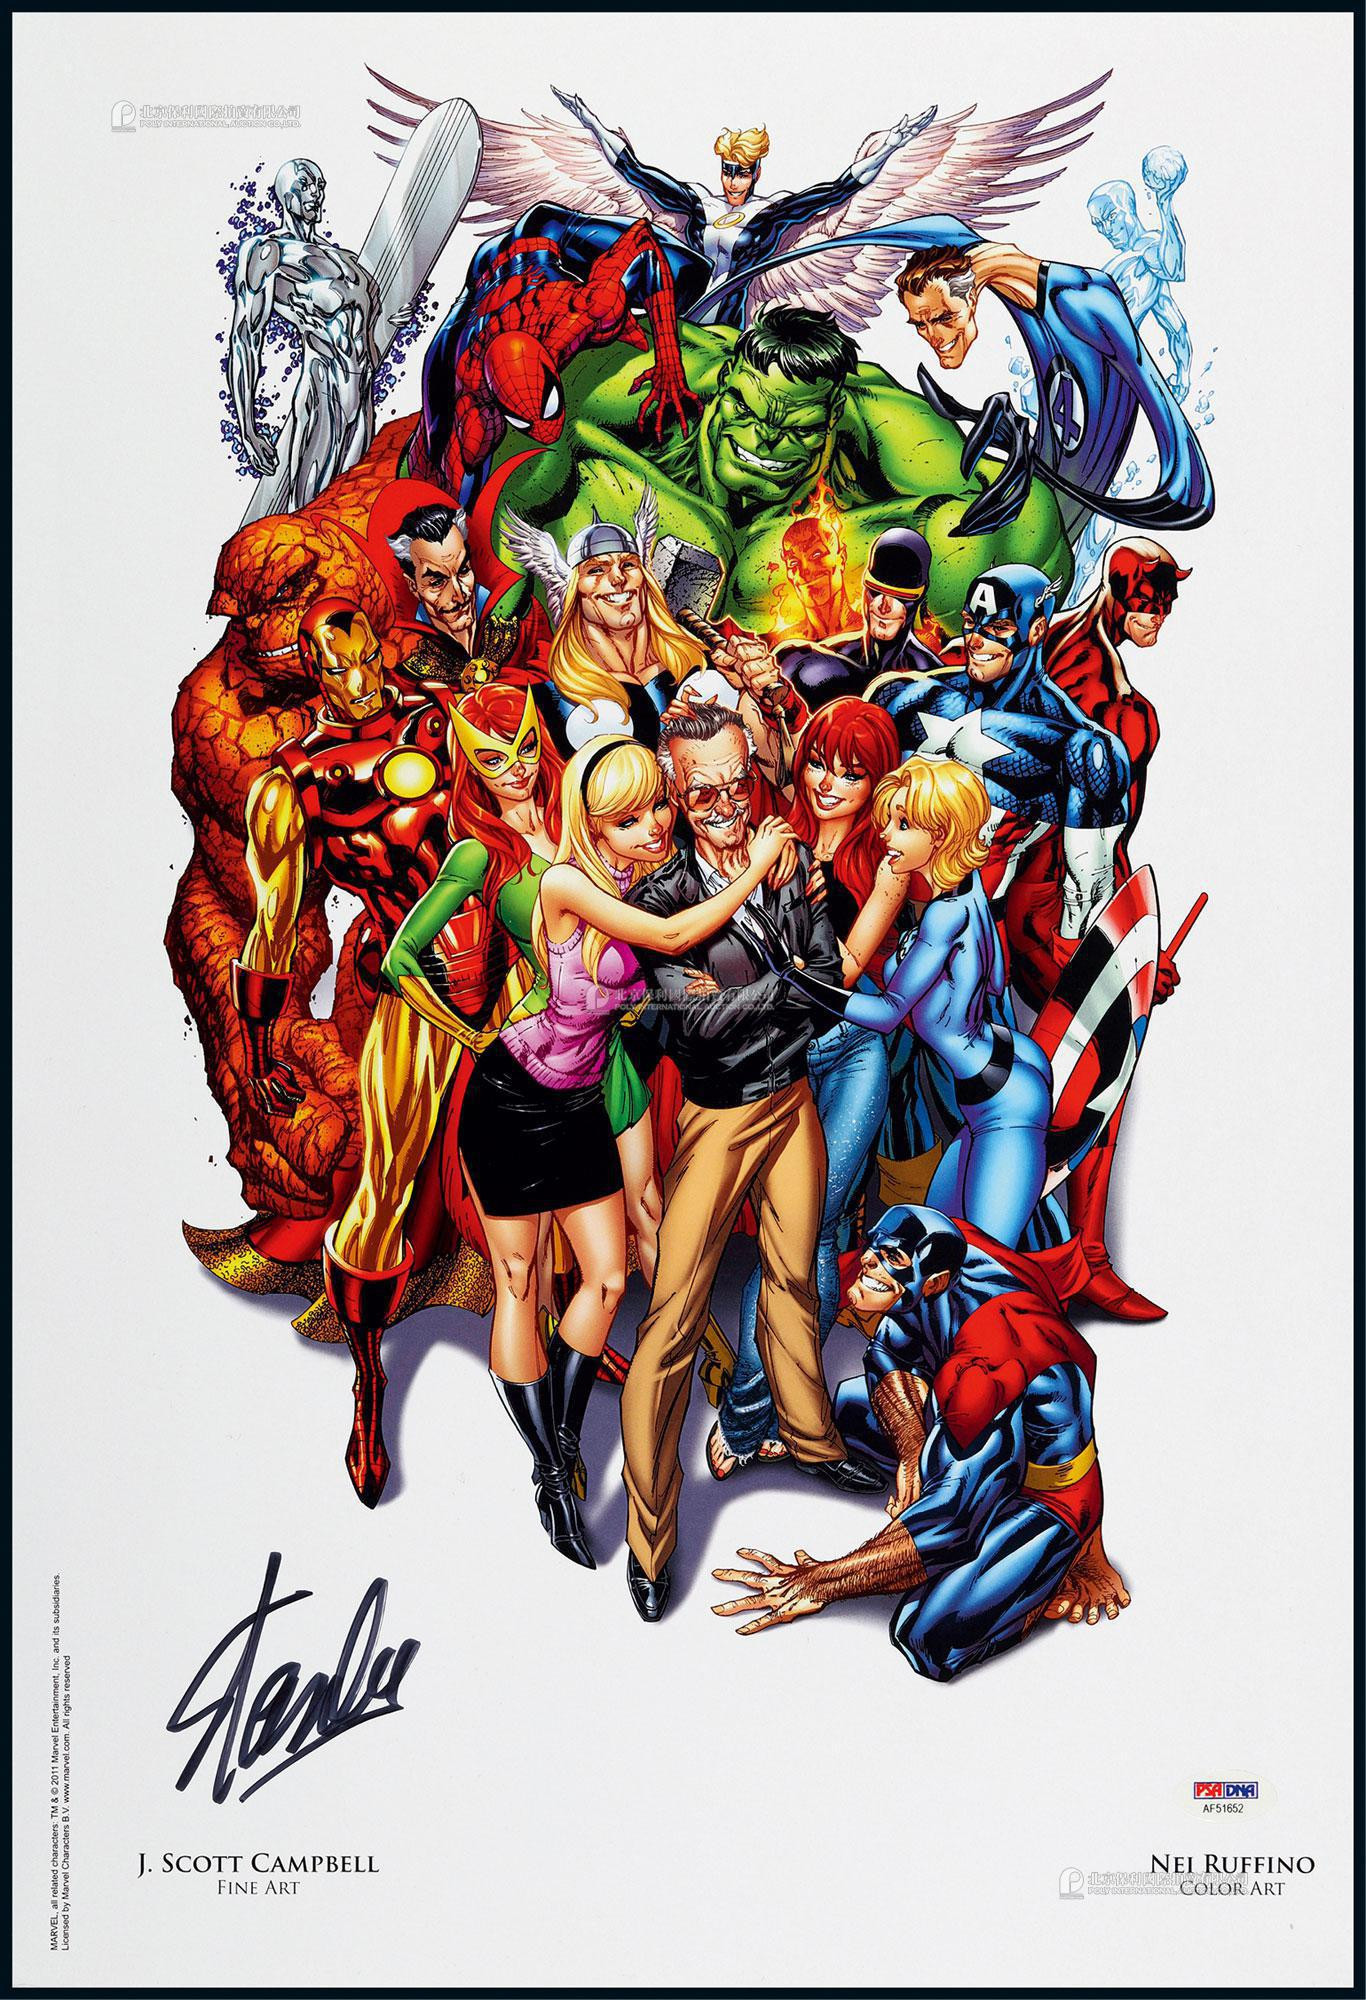 The autographed photo of Stan Lee, the “grand master of American Comics”, with certificate